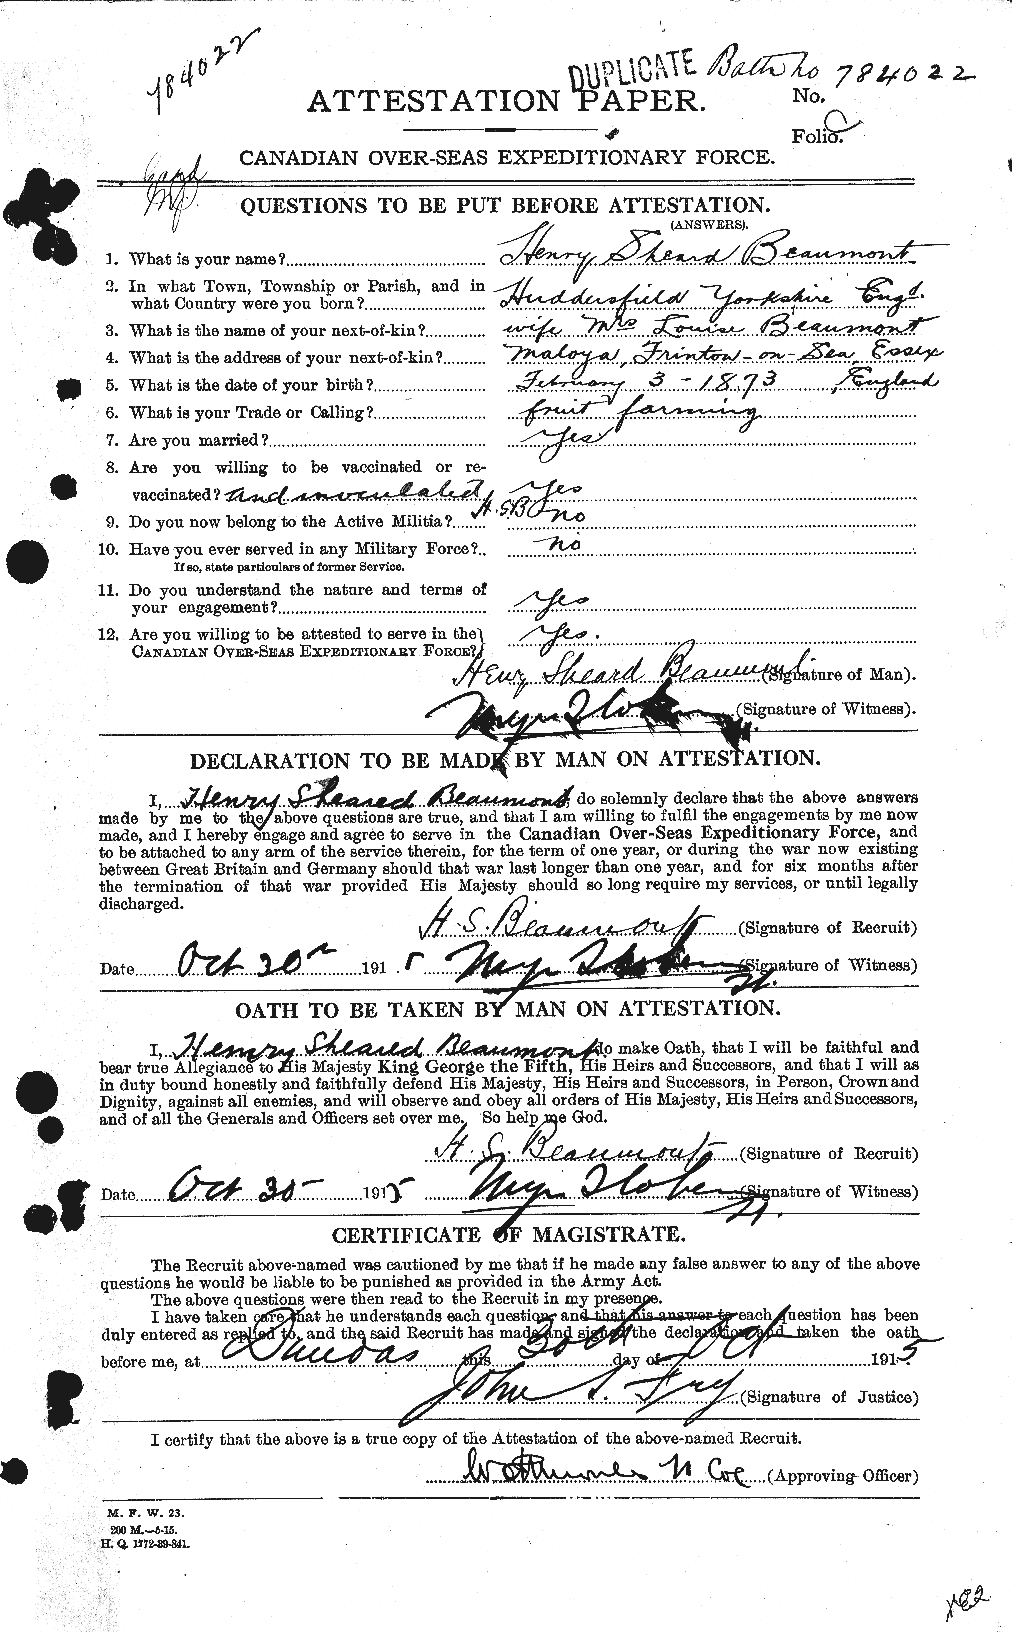 Personnel Records of the First World War - CEF 231675a